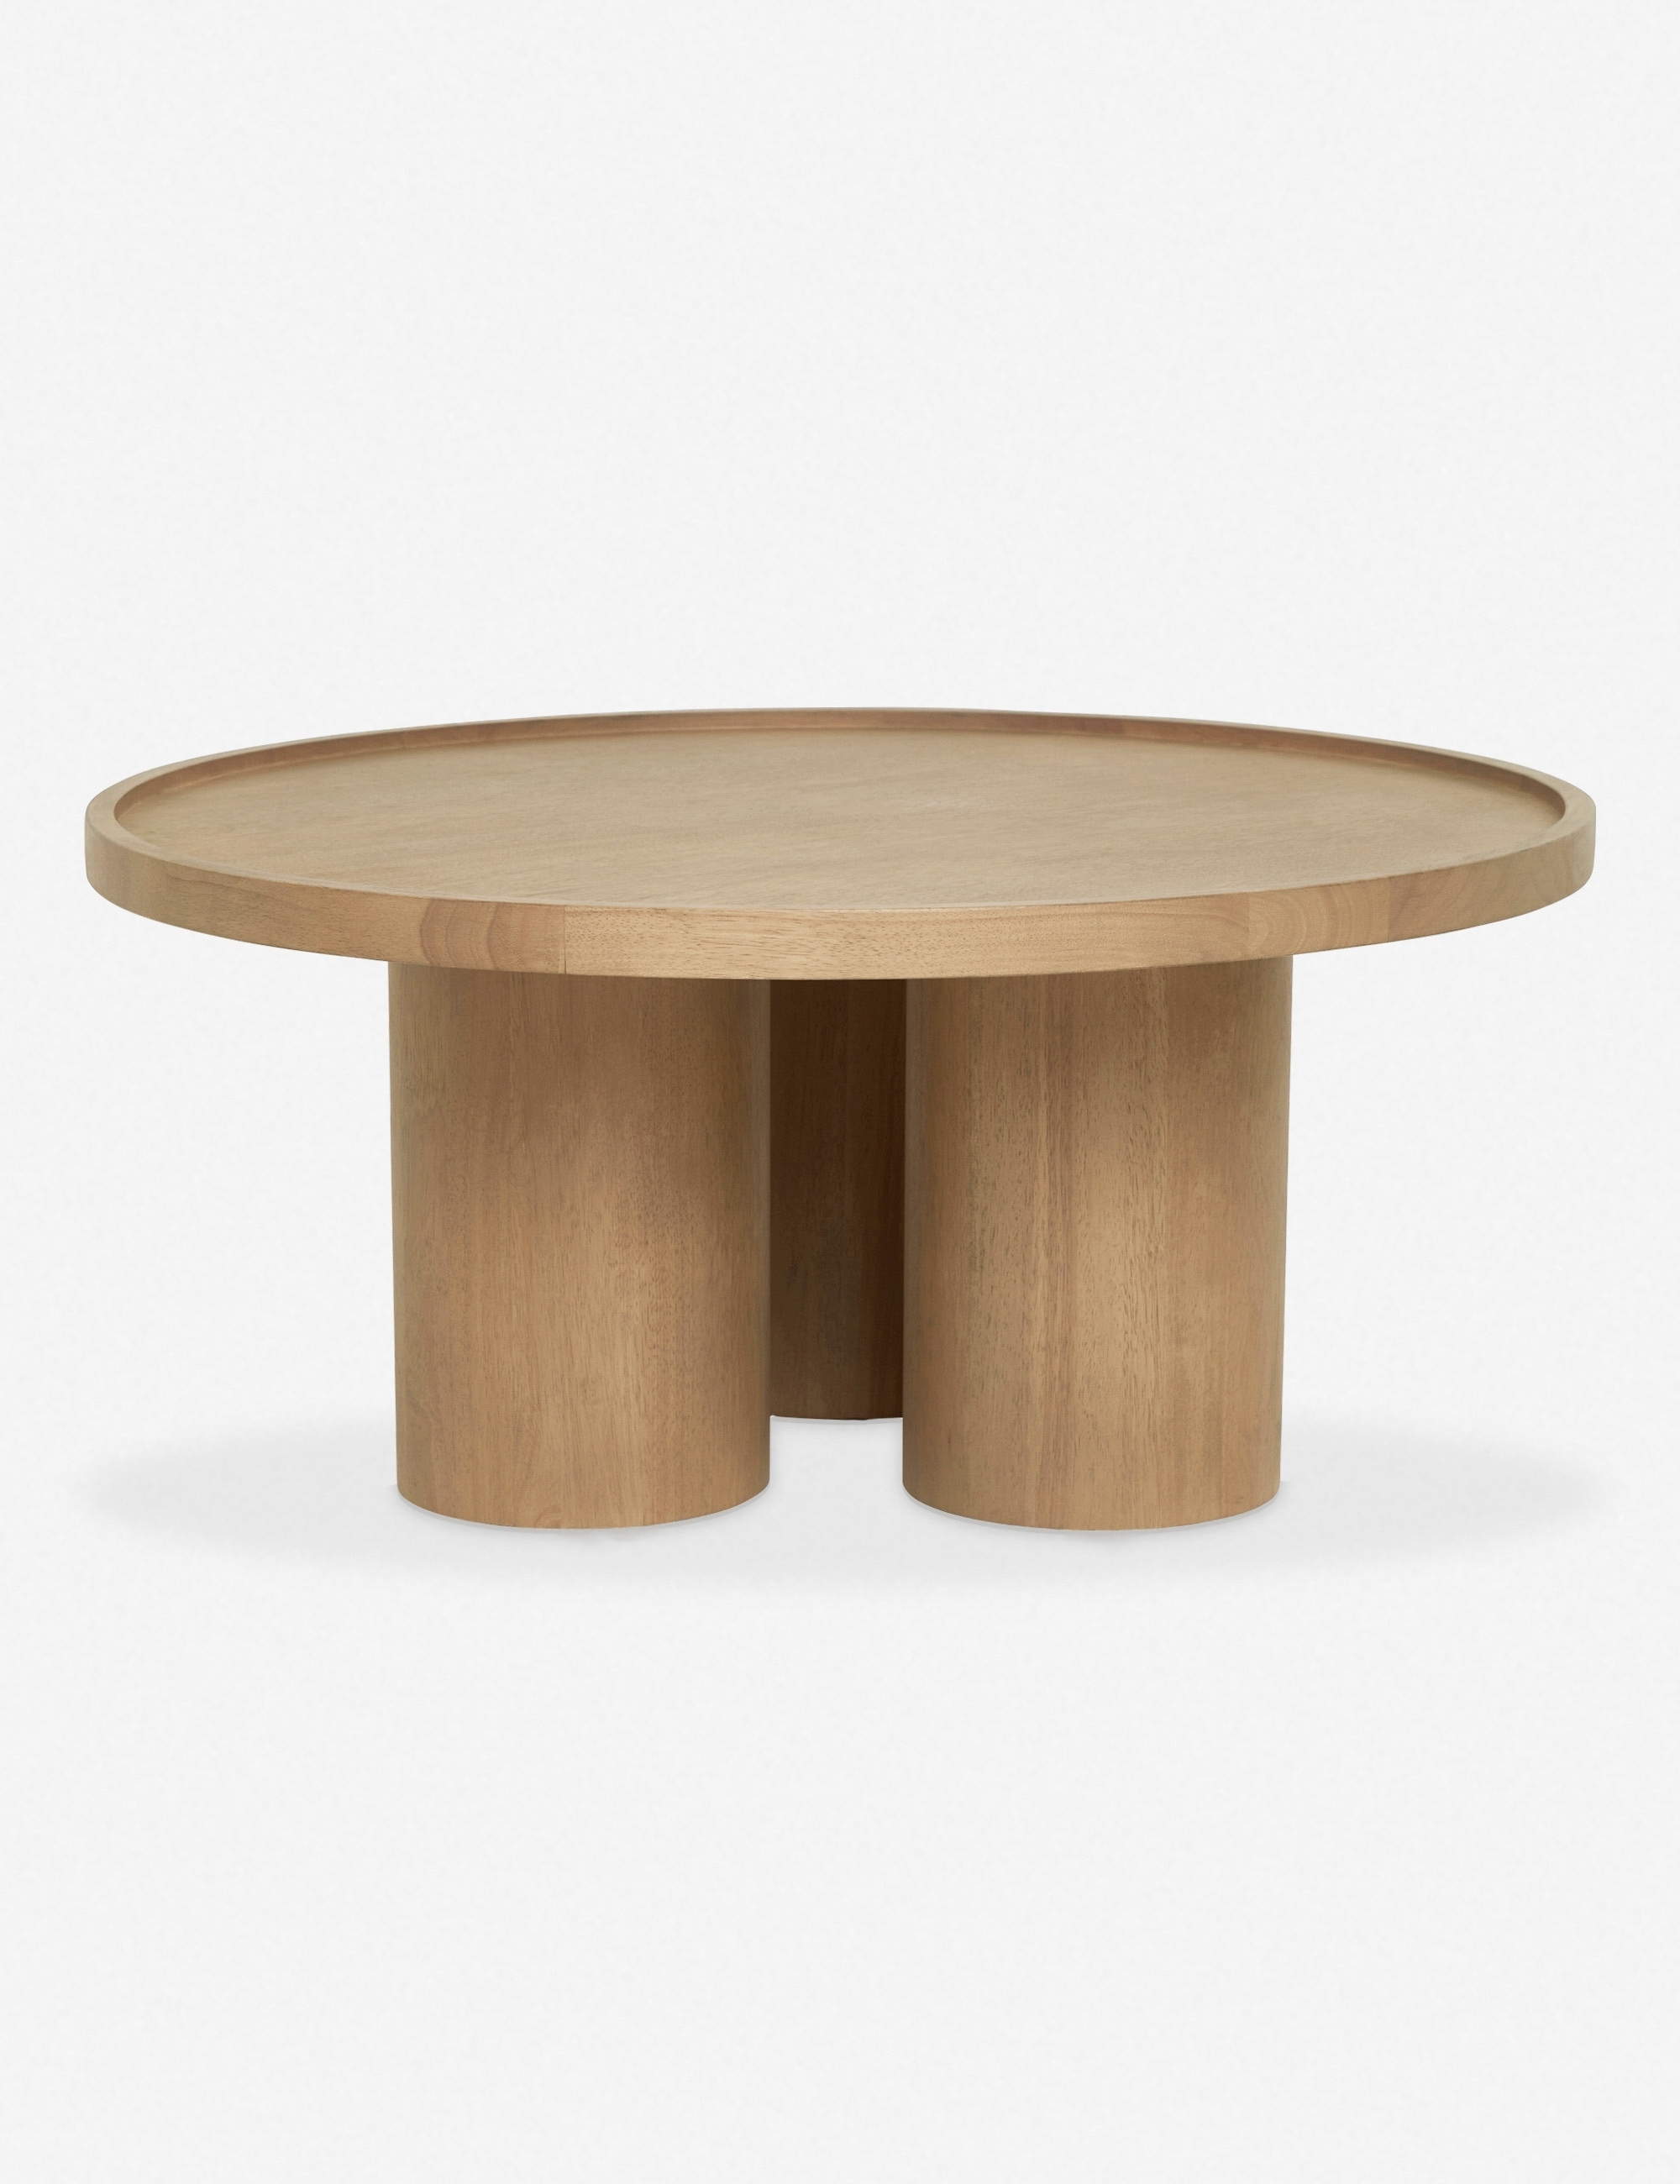 Delta Round Coffee Table - Image 6